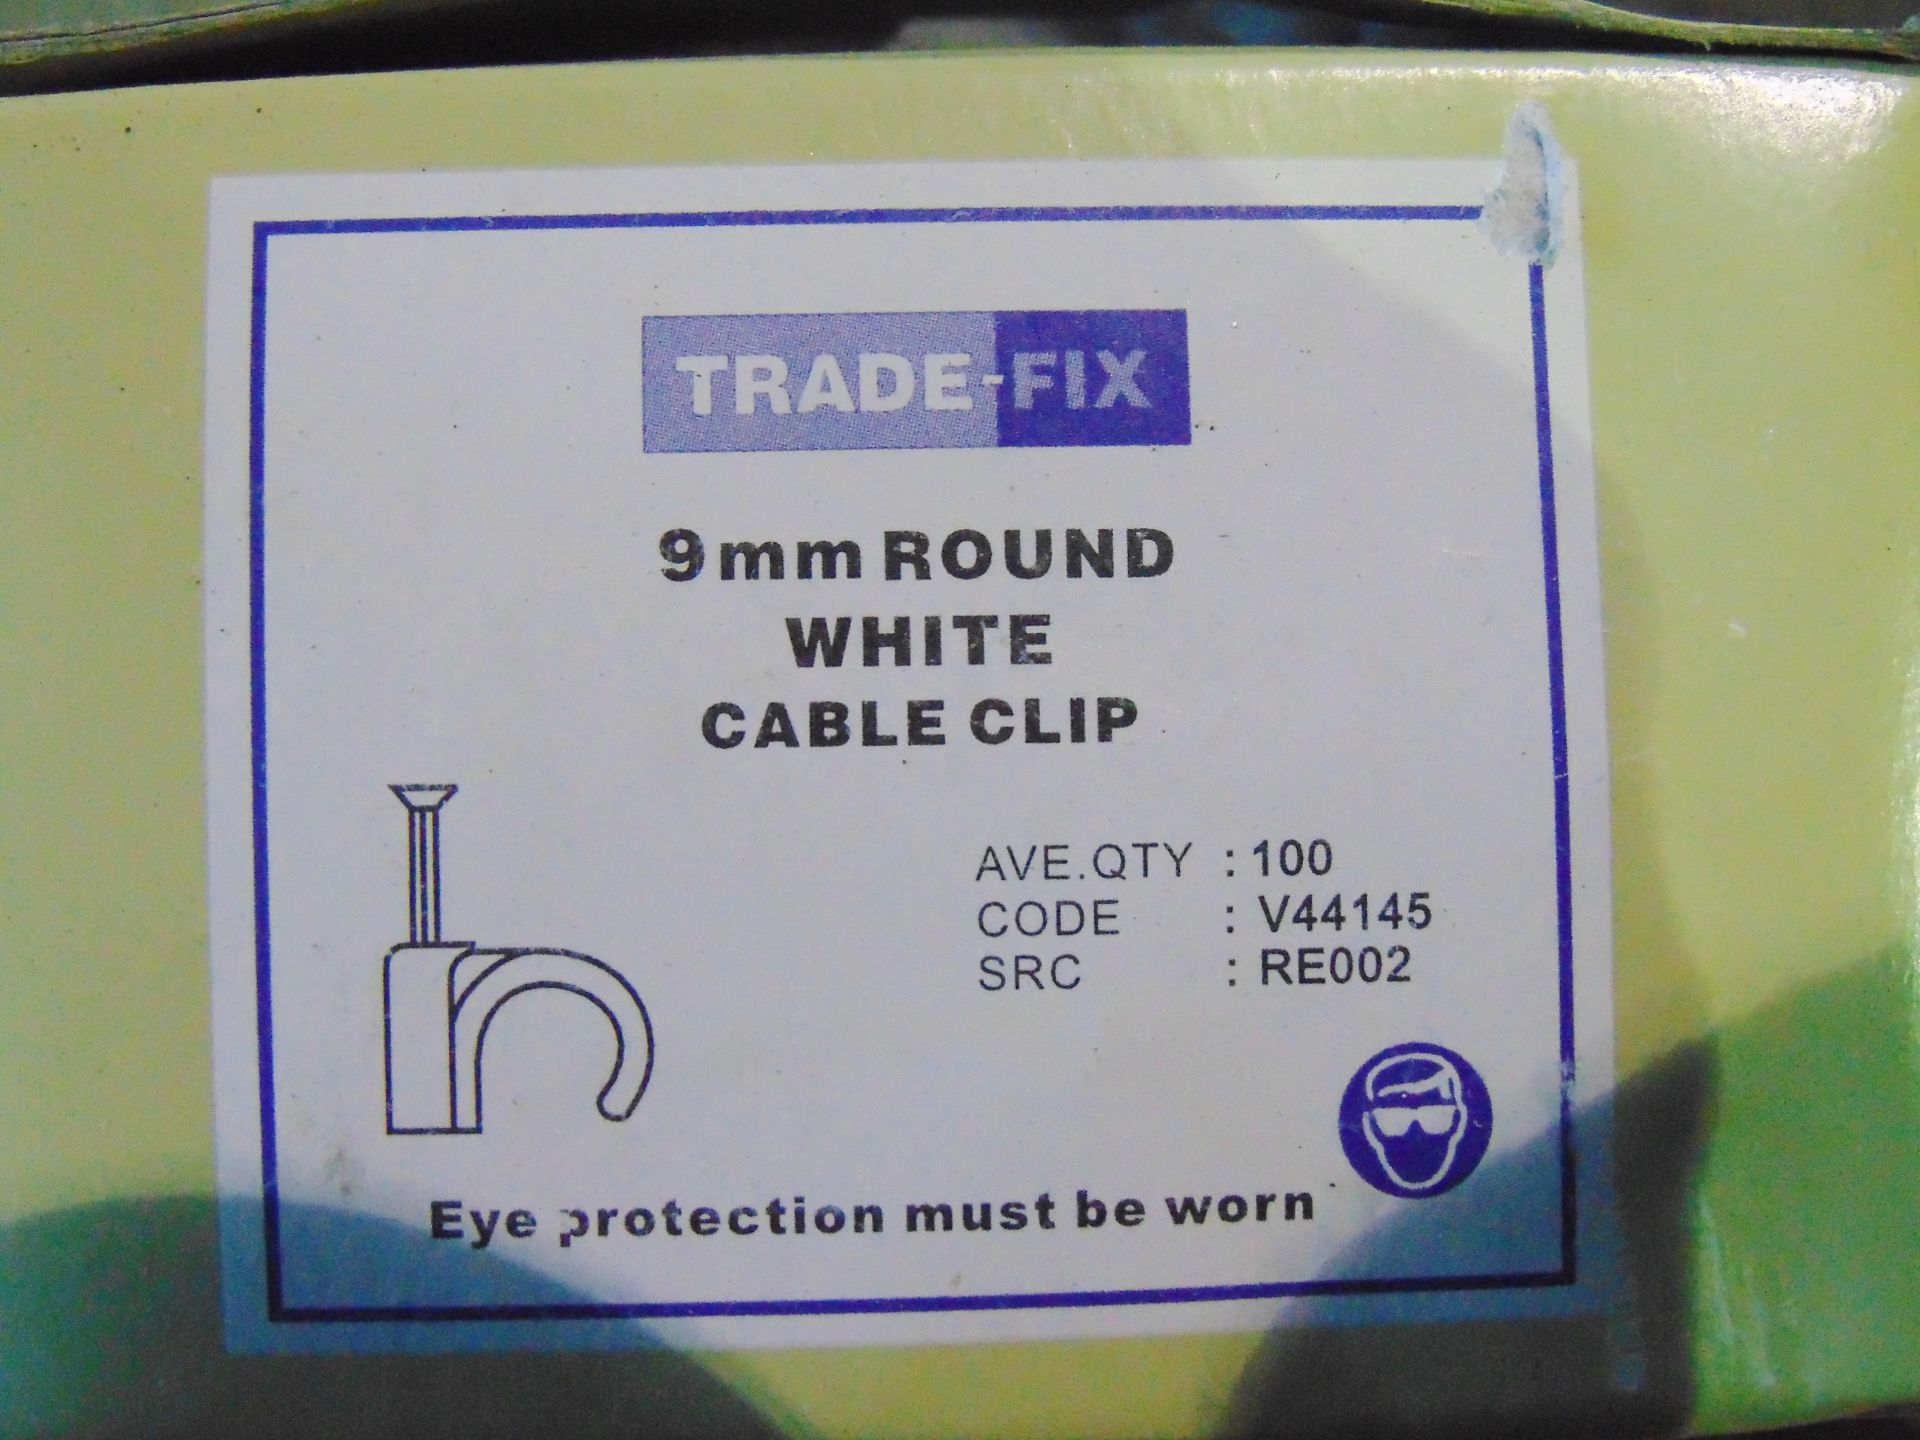 Approx 2000 9mm Round White Cable Wall Nail Clips - Image 3 of 3